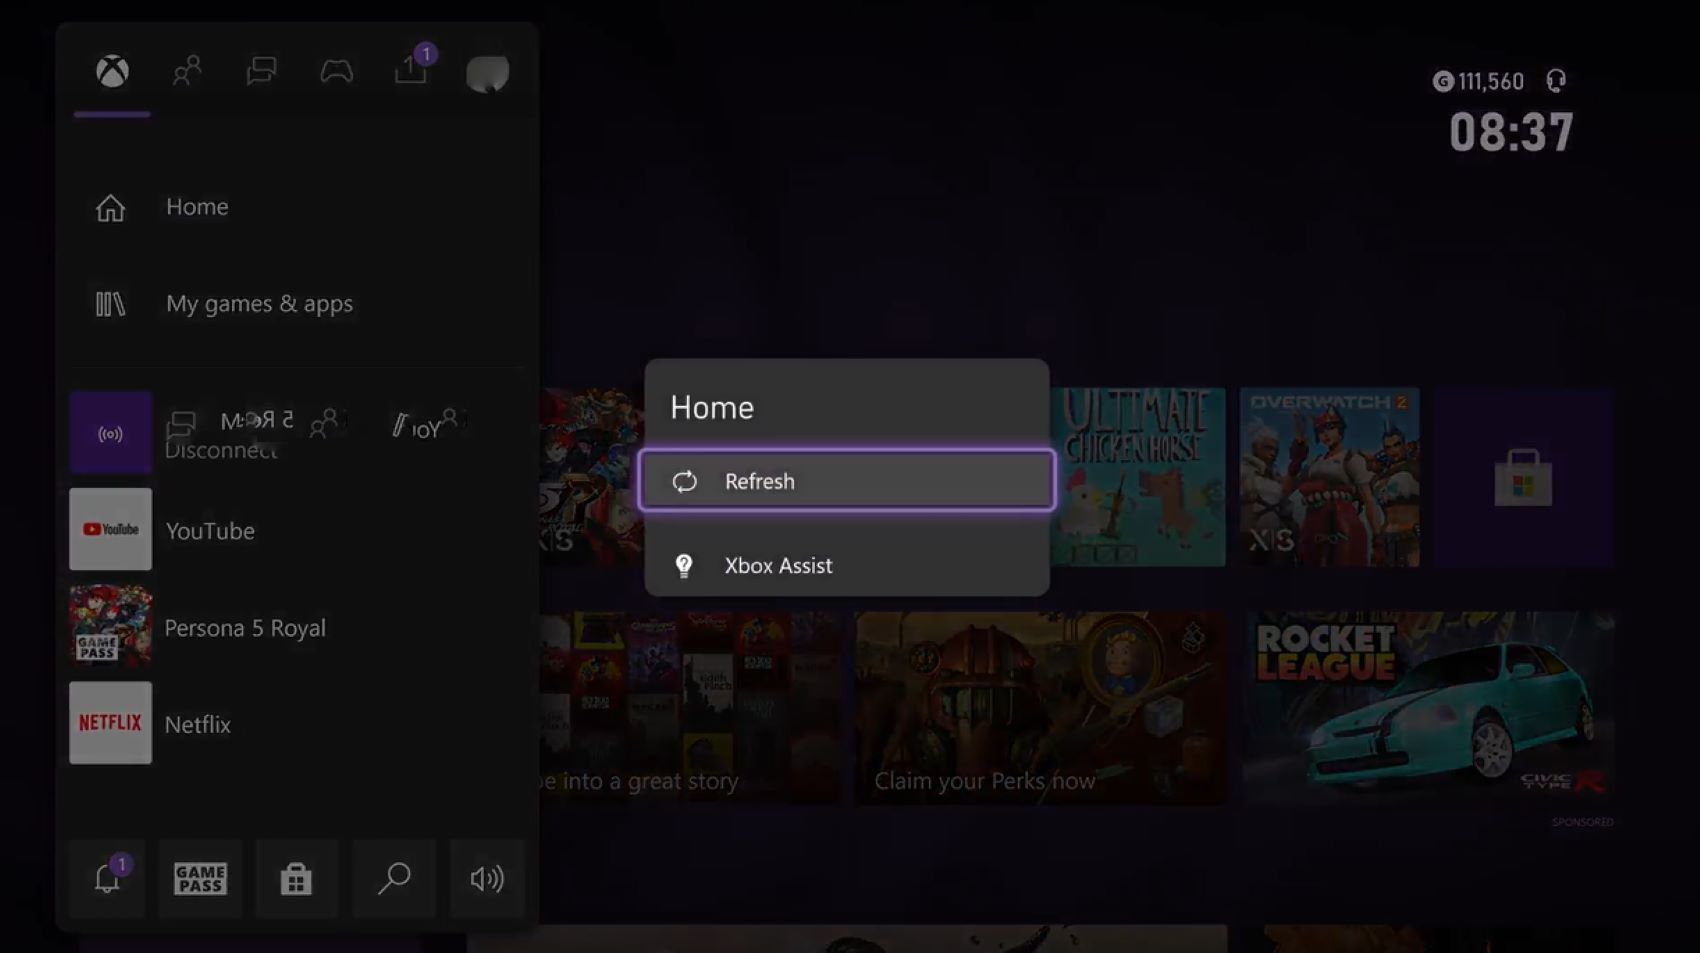 A screenshot of the options available for an Xbox Home screen through the guide menu with refresh highlighted